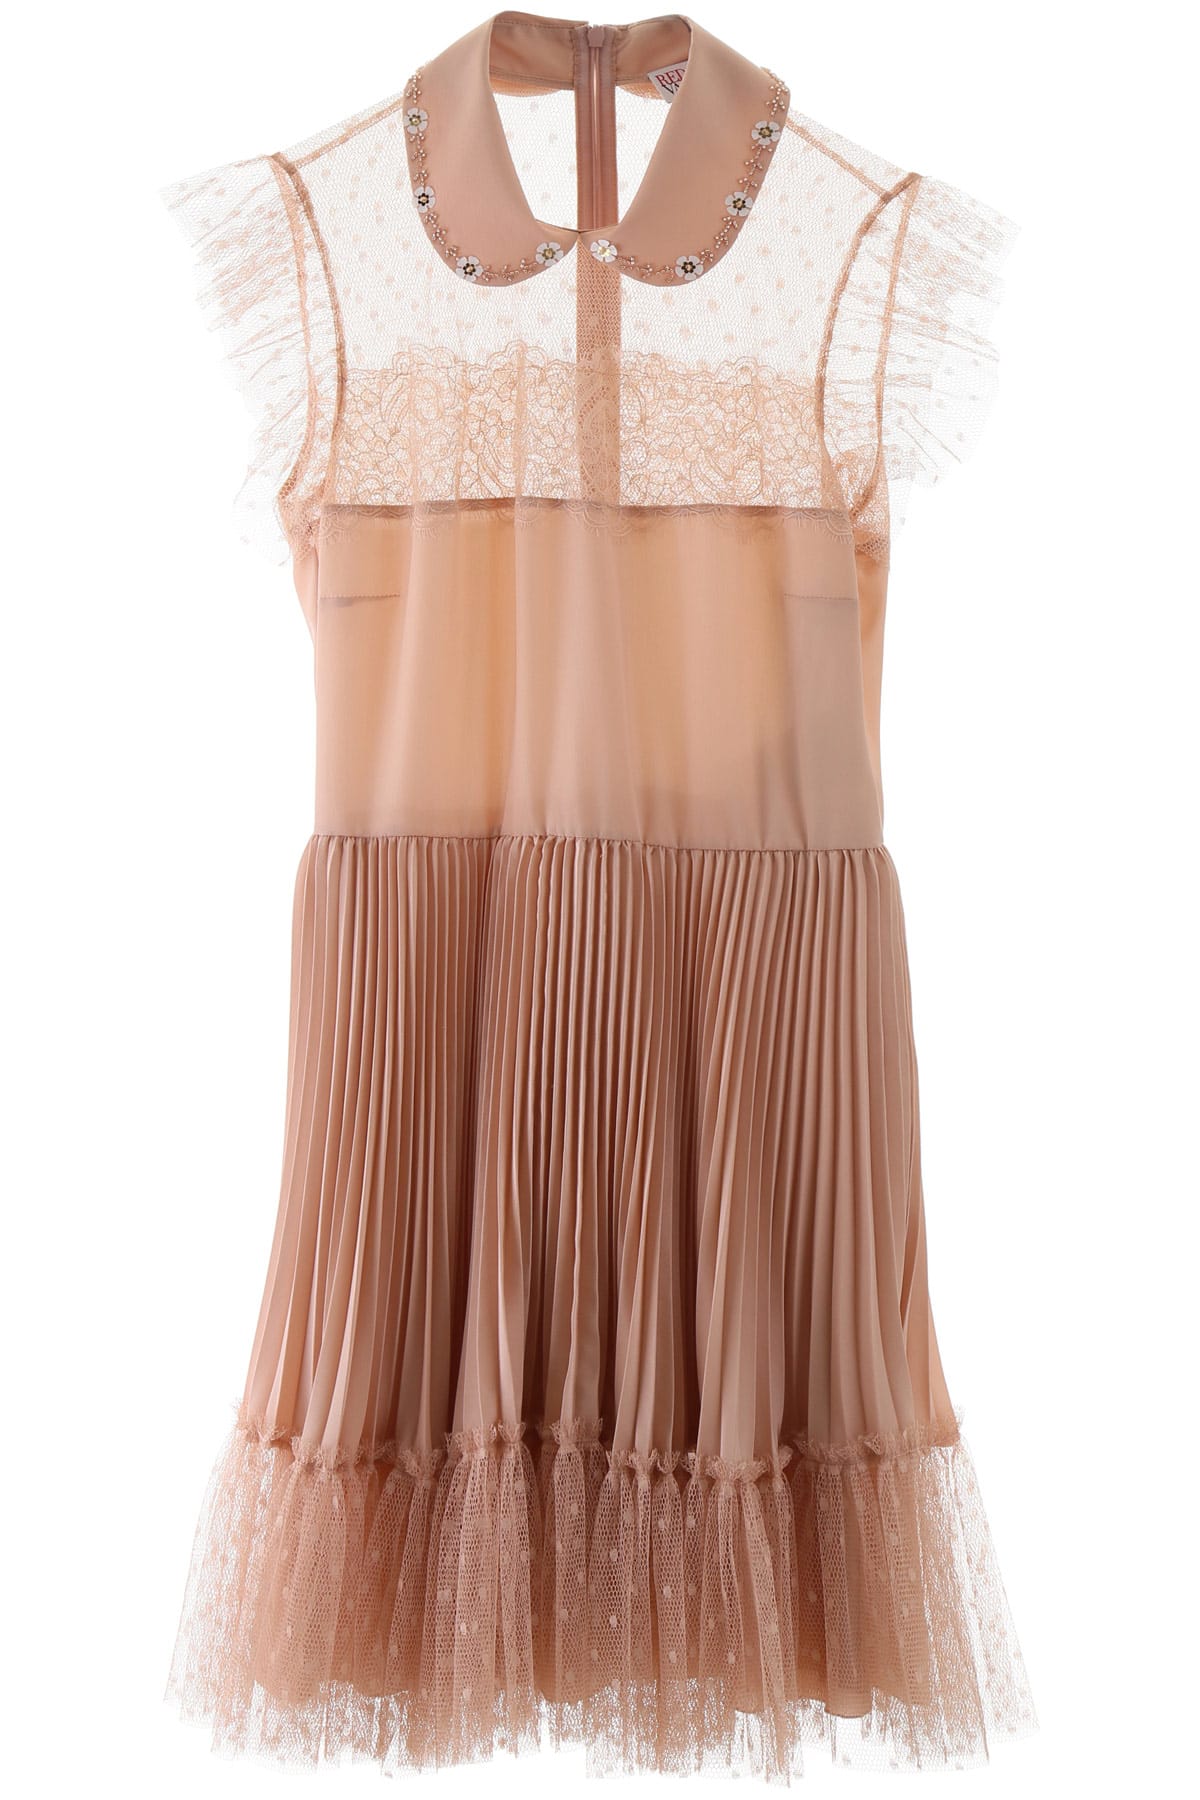 RED Valentino Mini Dress With Tulle